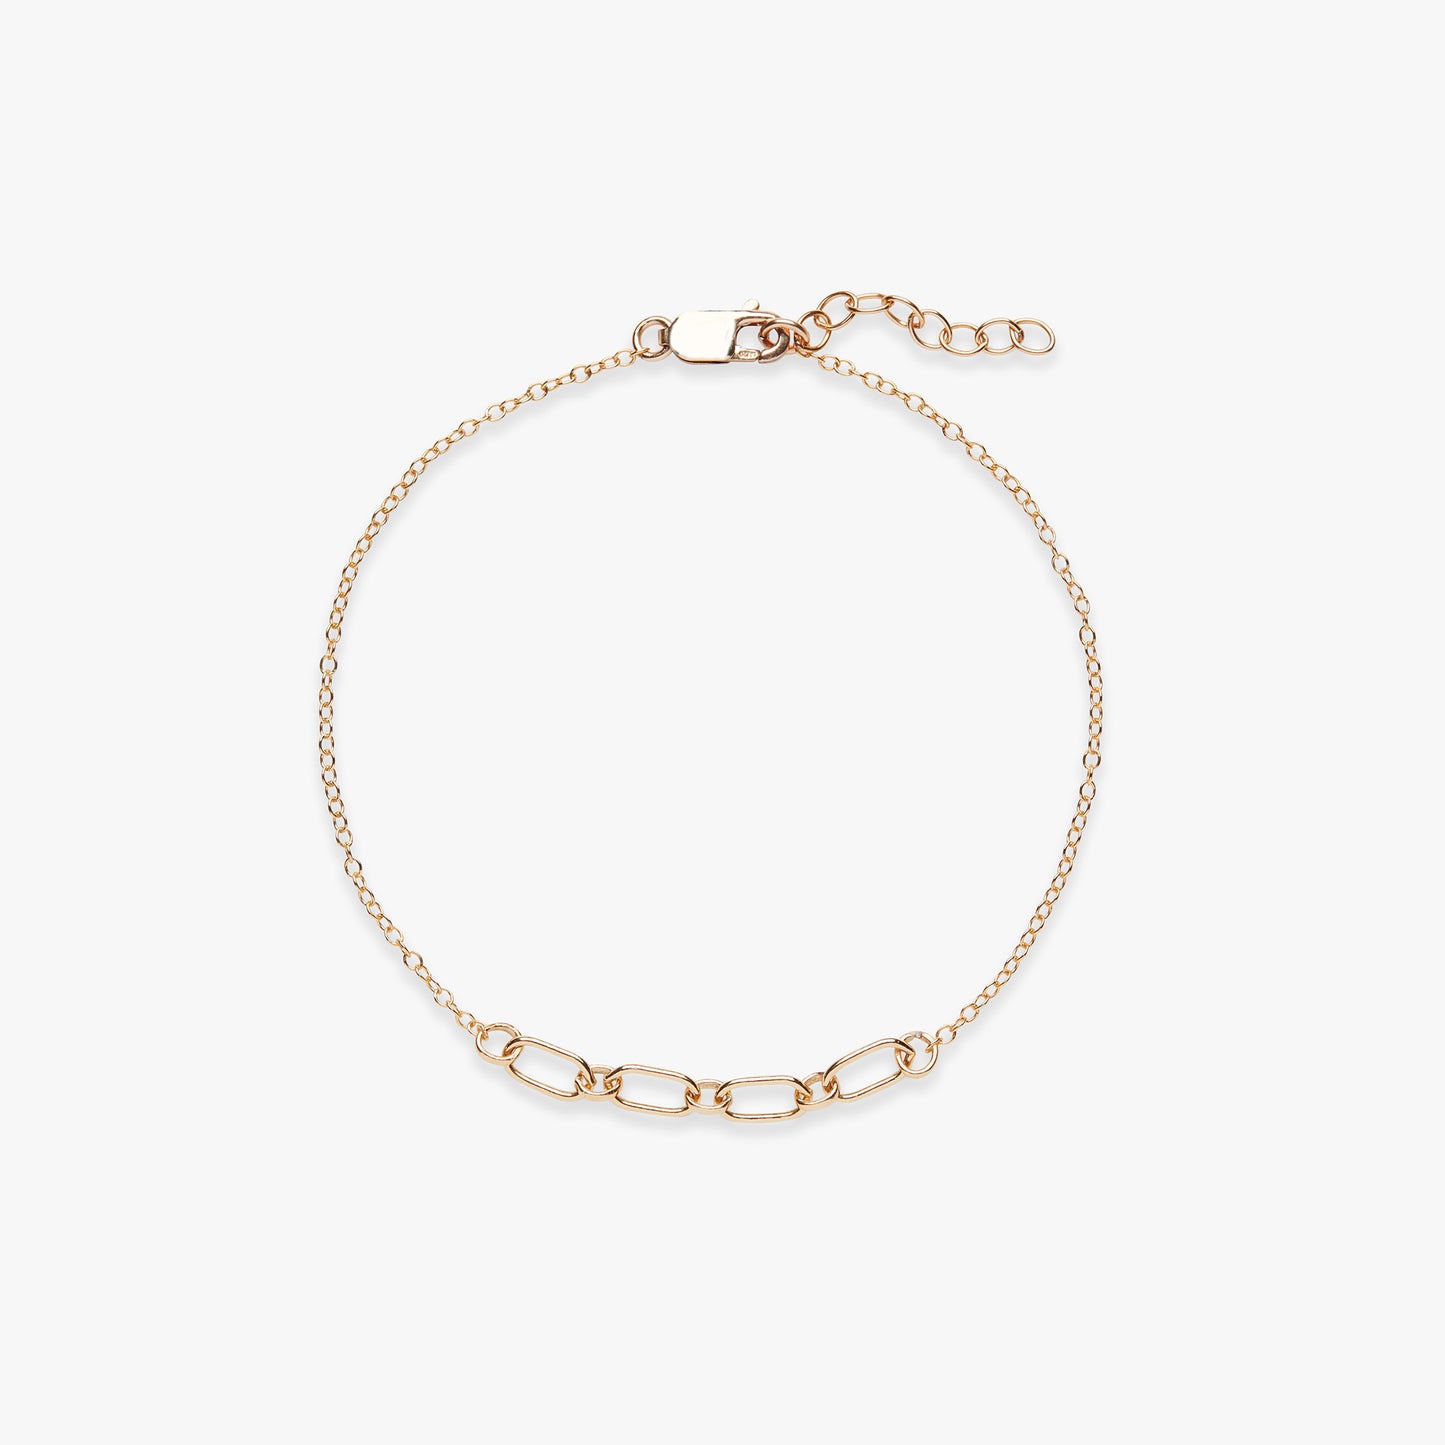 Oval links armband gold filled